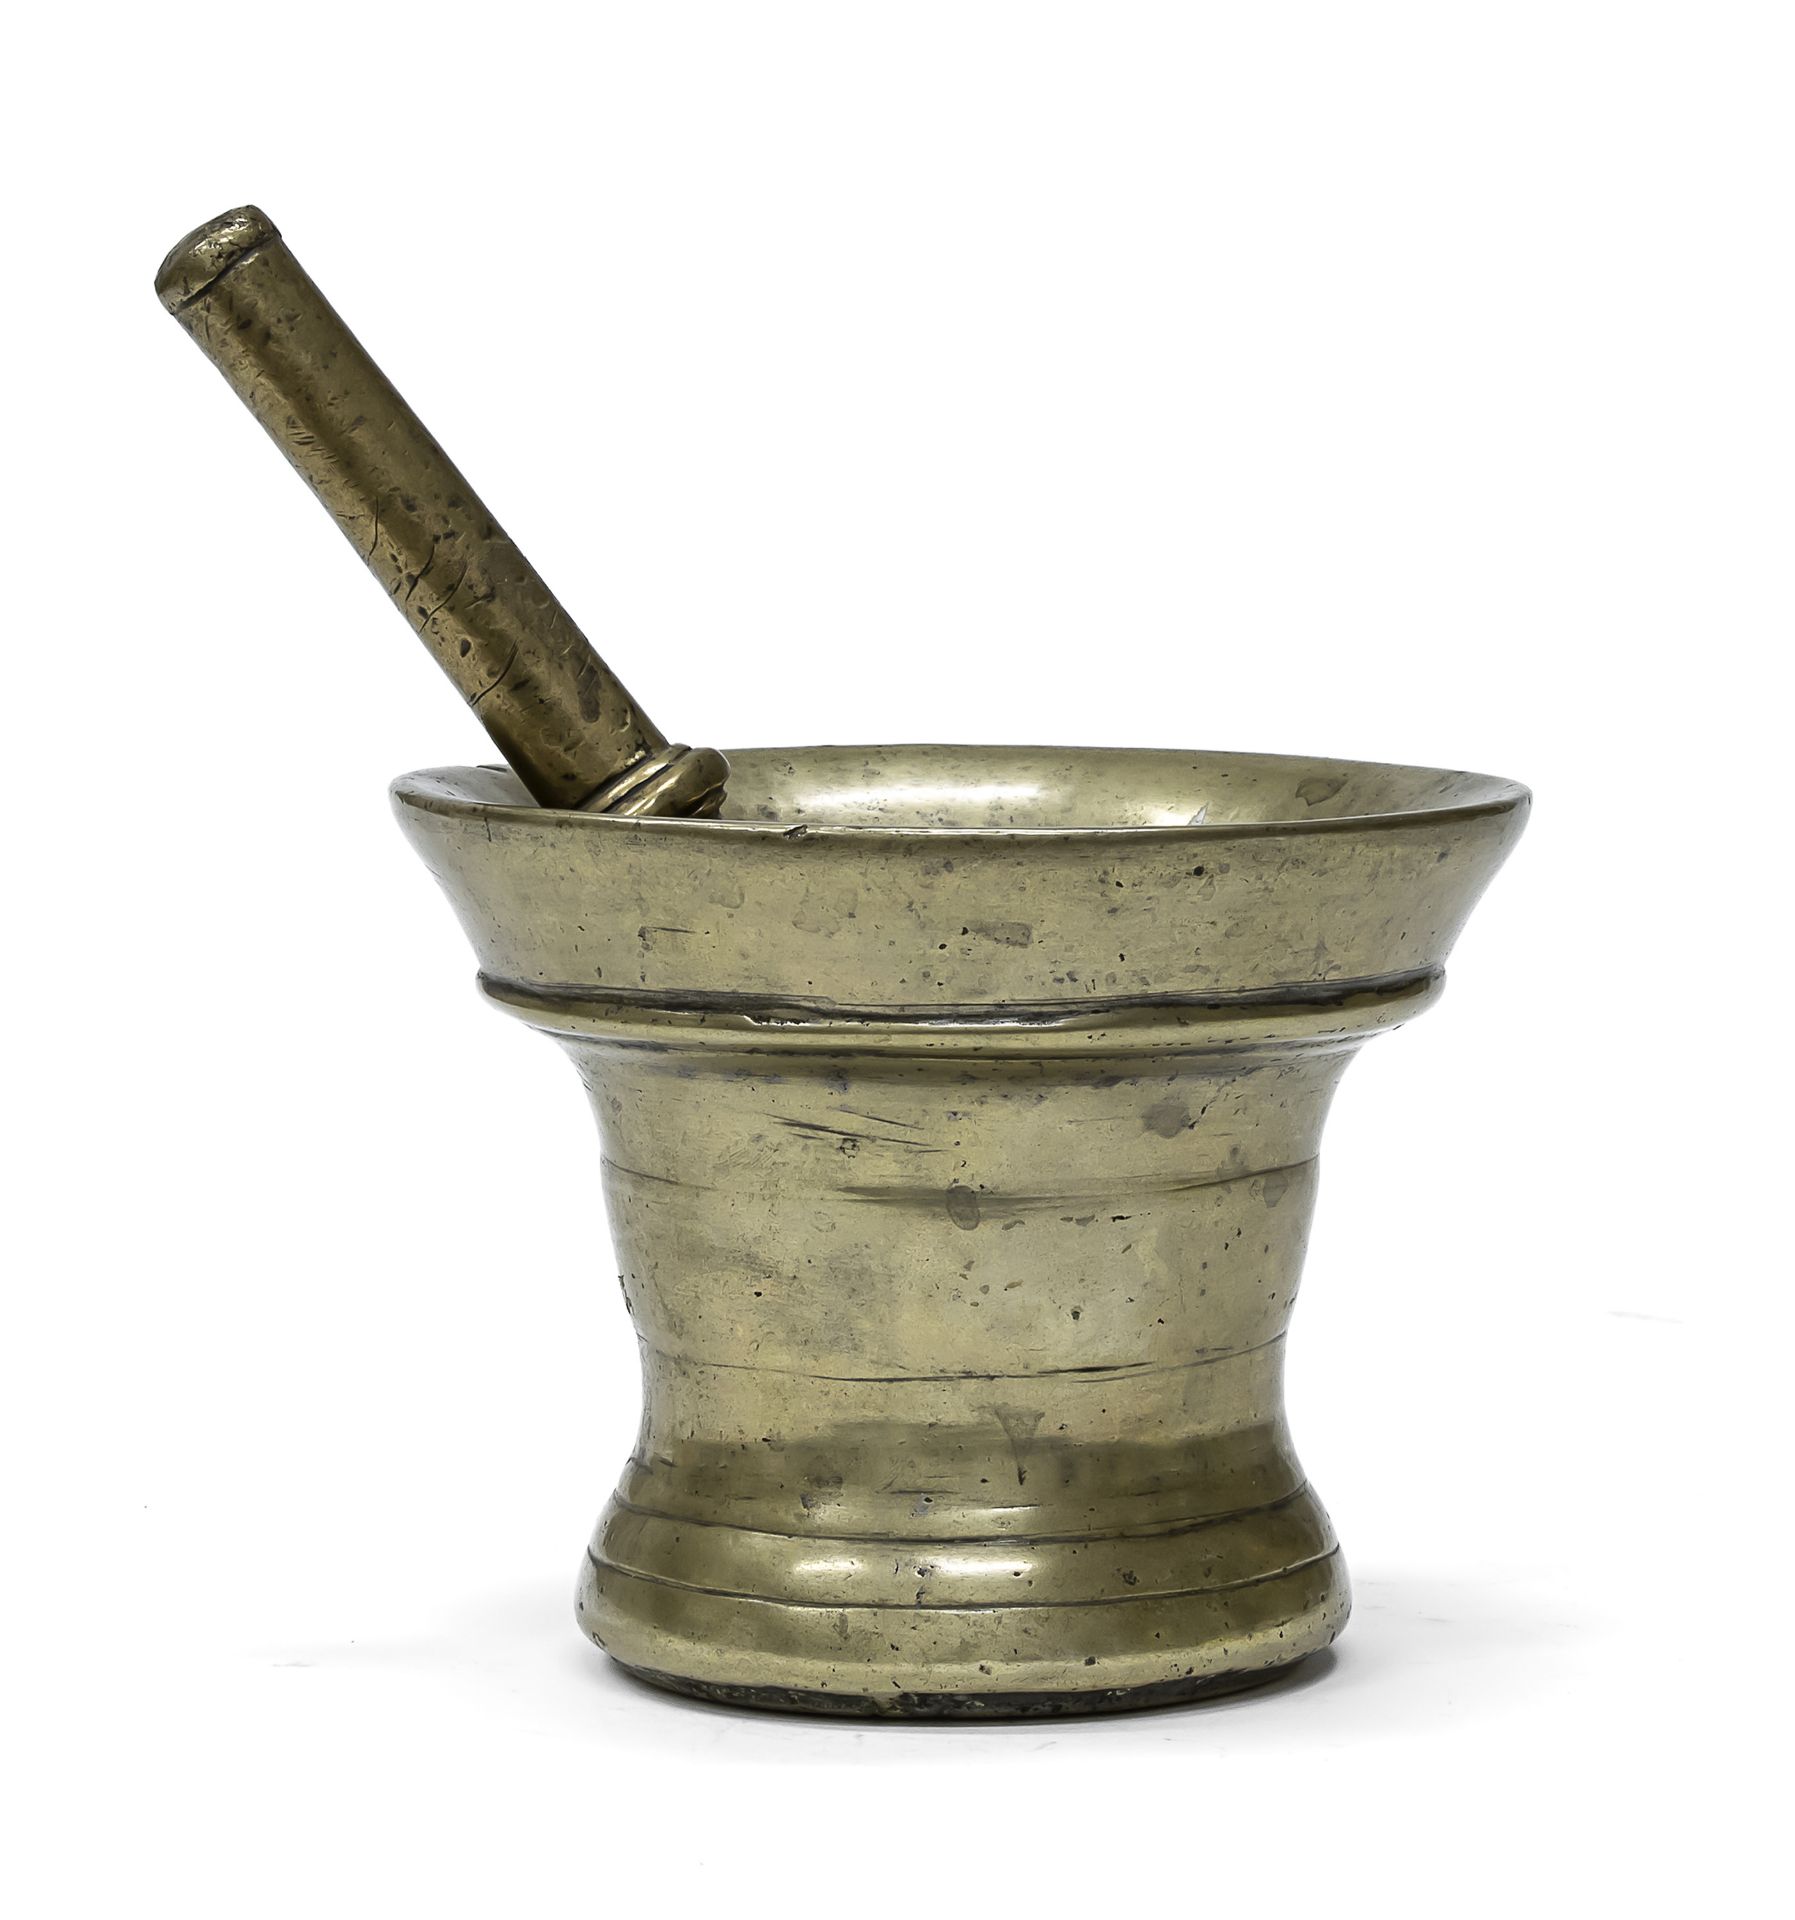 GOLDEN BRONZE MORTAR AND PESTLE END OF THE 18TH CENTURY